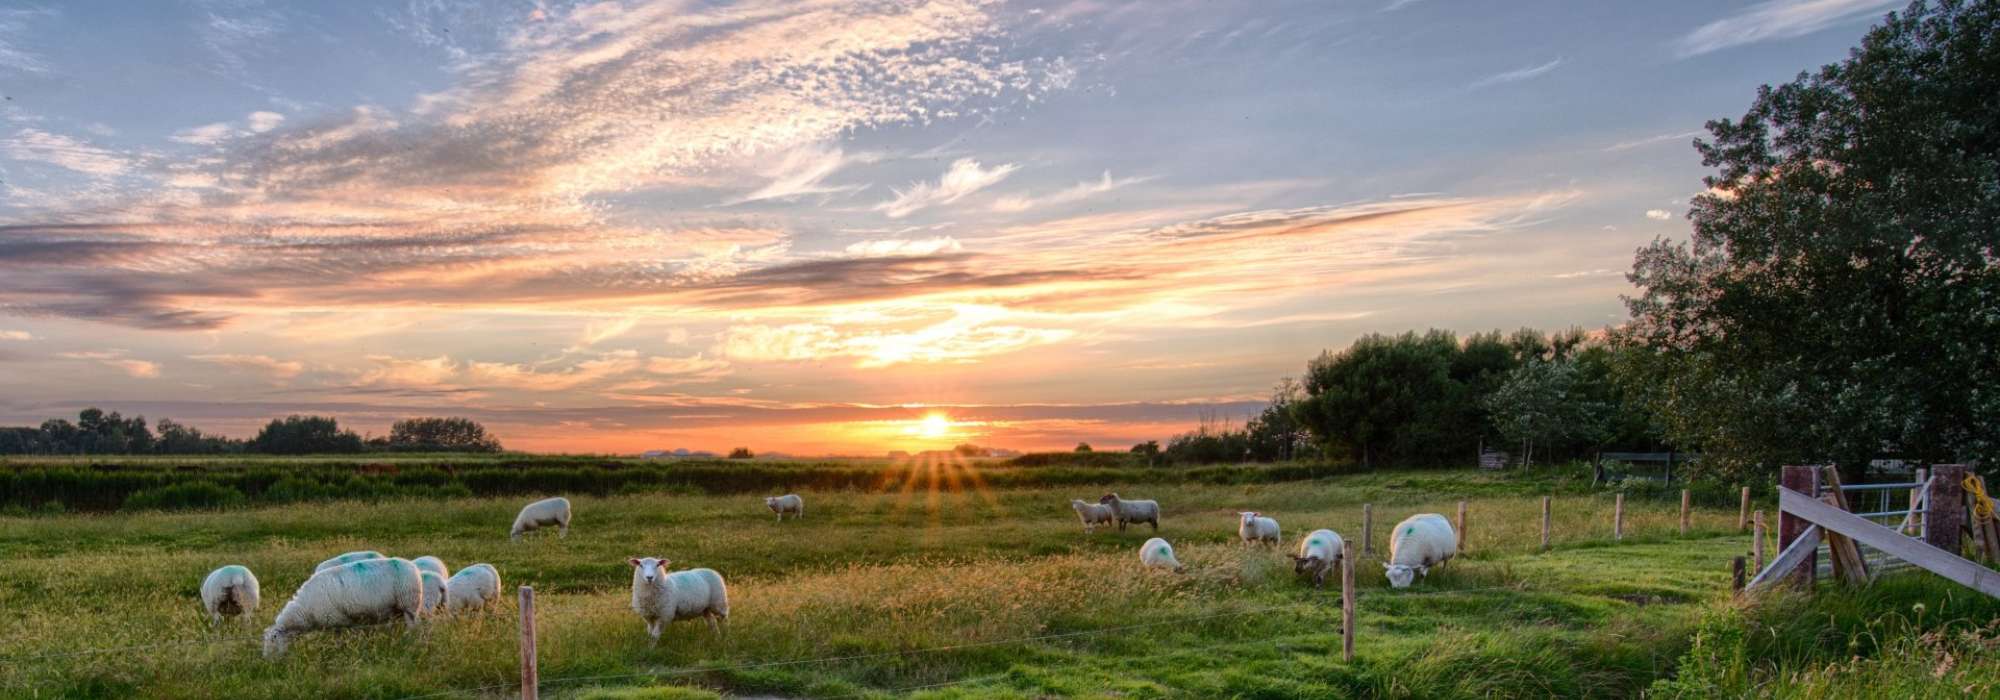 Lovely sunset and cloudy sky over field with sheep in it and lake in distance 